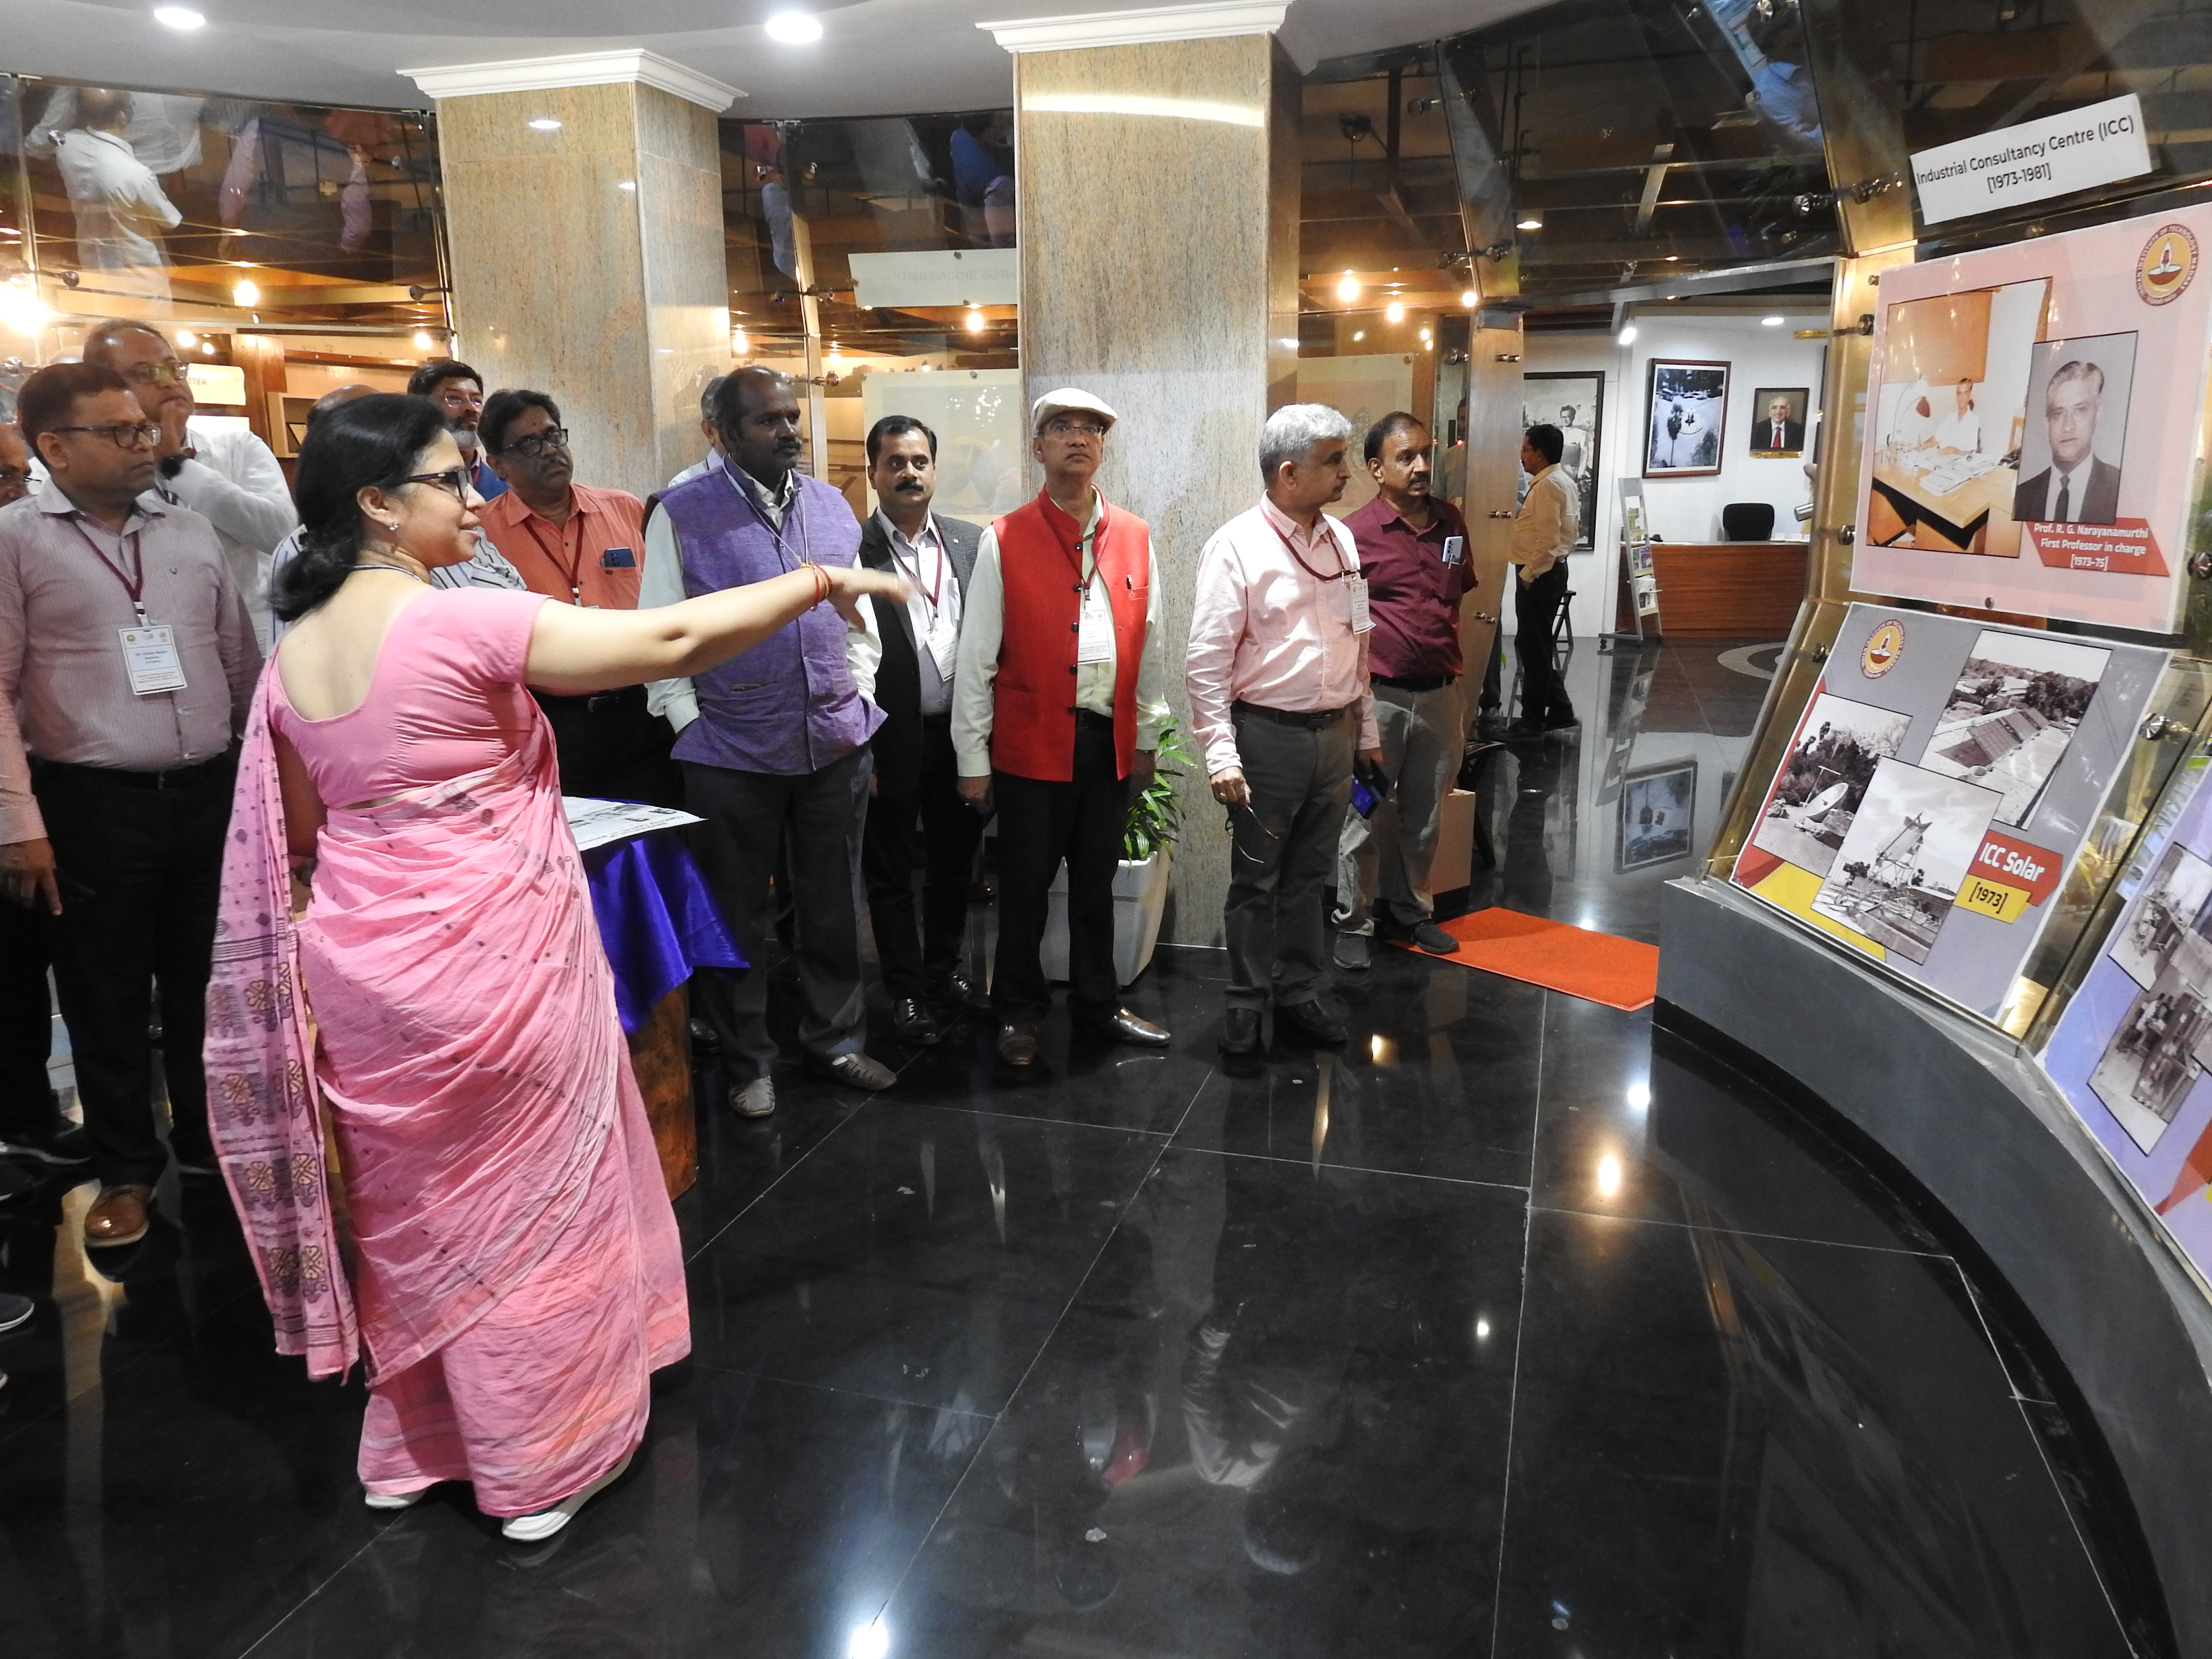 Mrs. Mamata Dash (Senior Project Officer of the Heritage Centre) explains the dome exhibition 